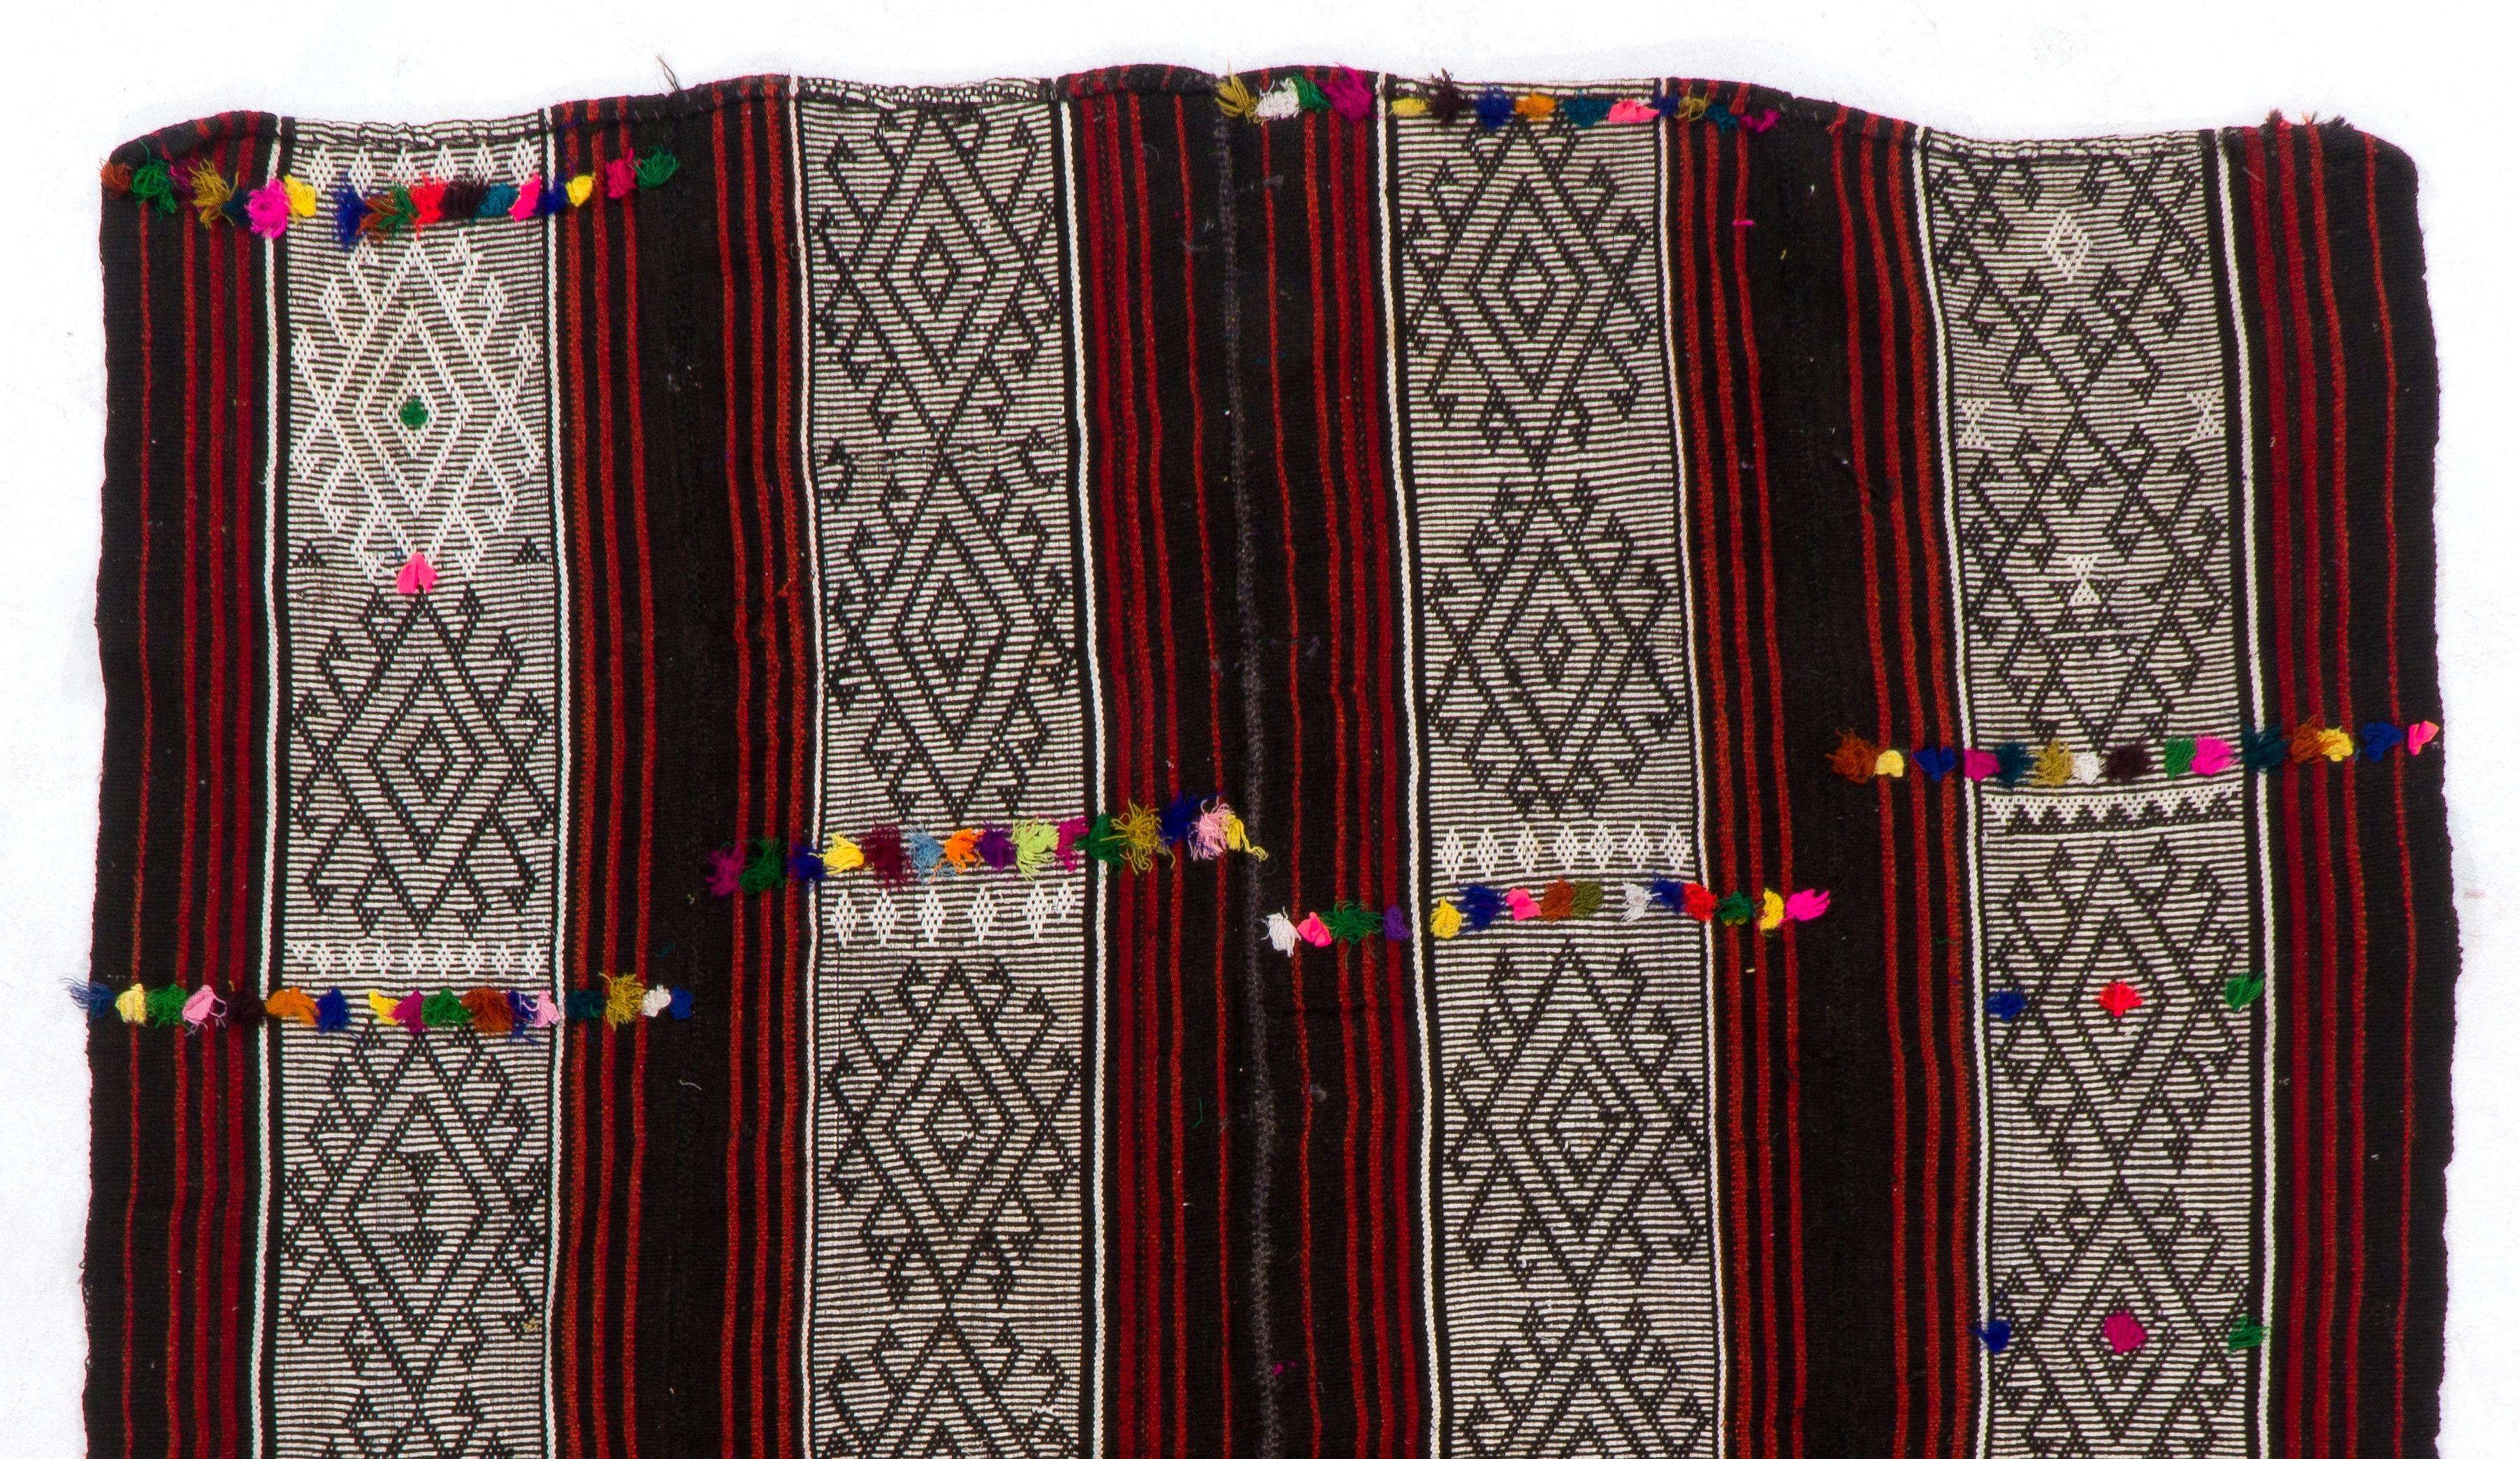 A vintage handwoven flat-weave (kilim) from Turkey made of cotton and wool featuring a 'boho chic' design with colorful pom poms on a field with vertical stripes and burdock motifs in red, very dark brown and cream colors. Ideal for both residential